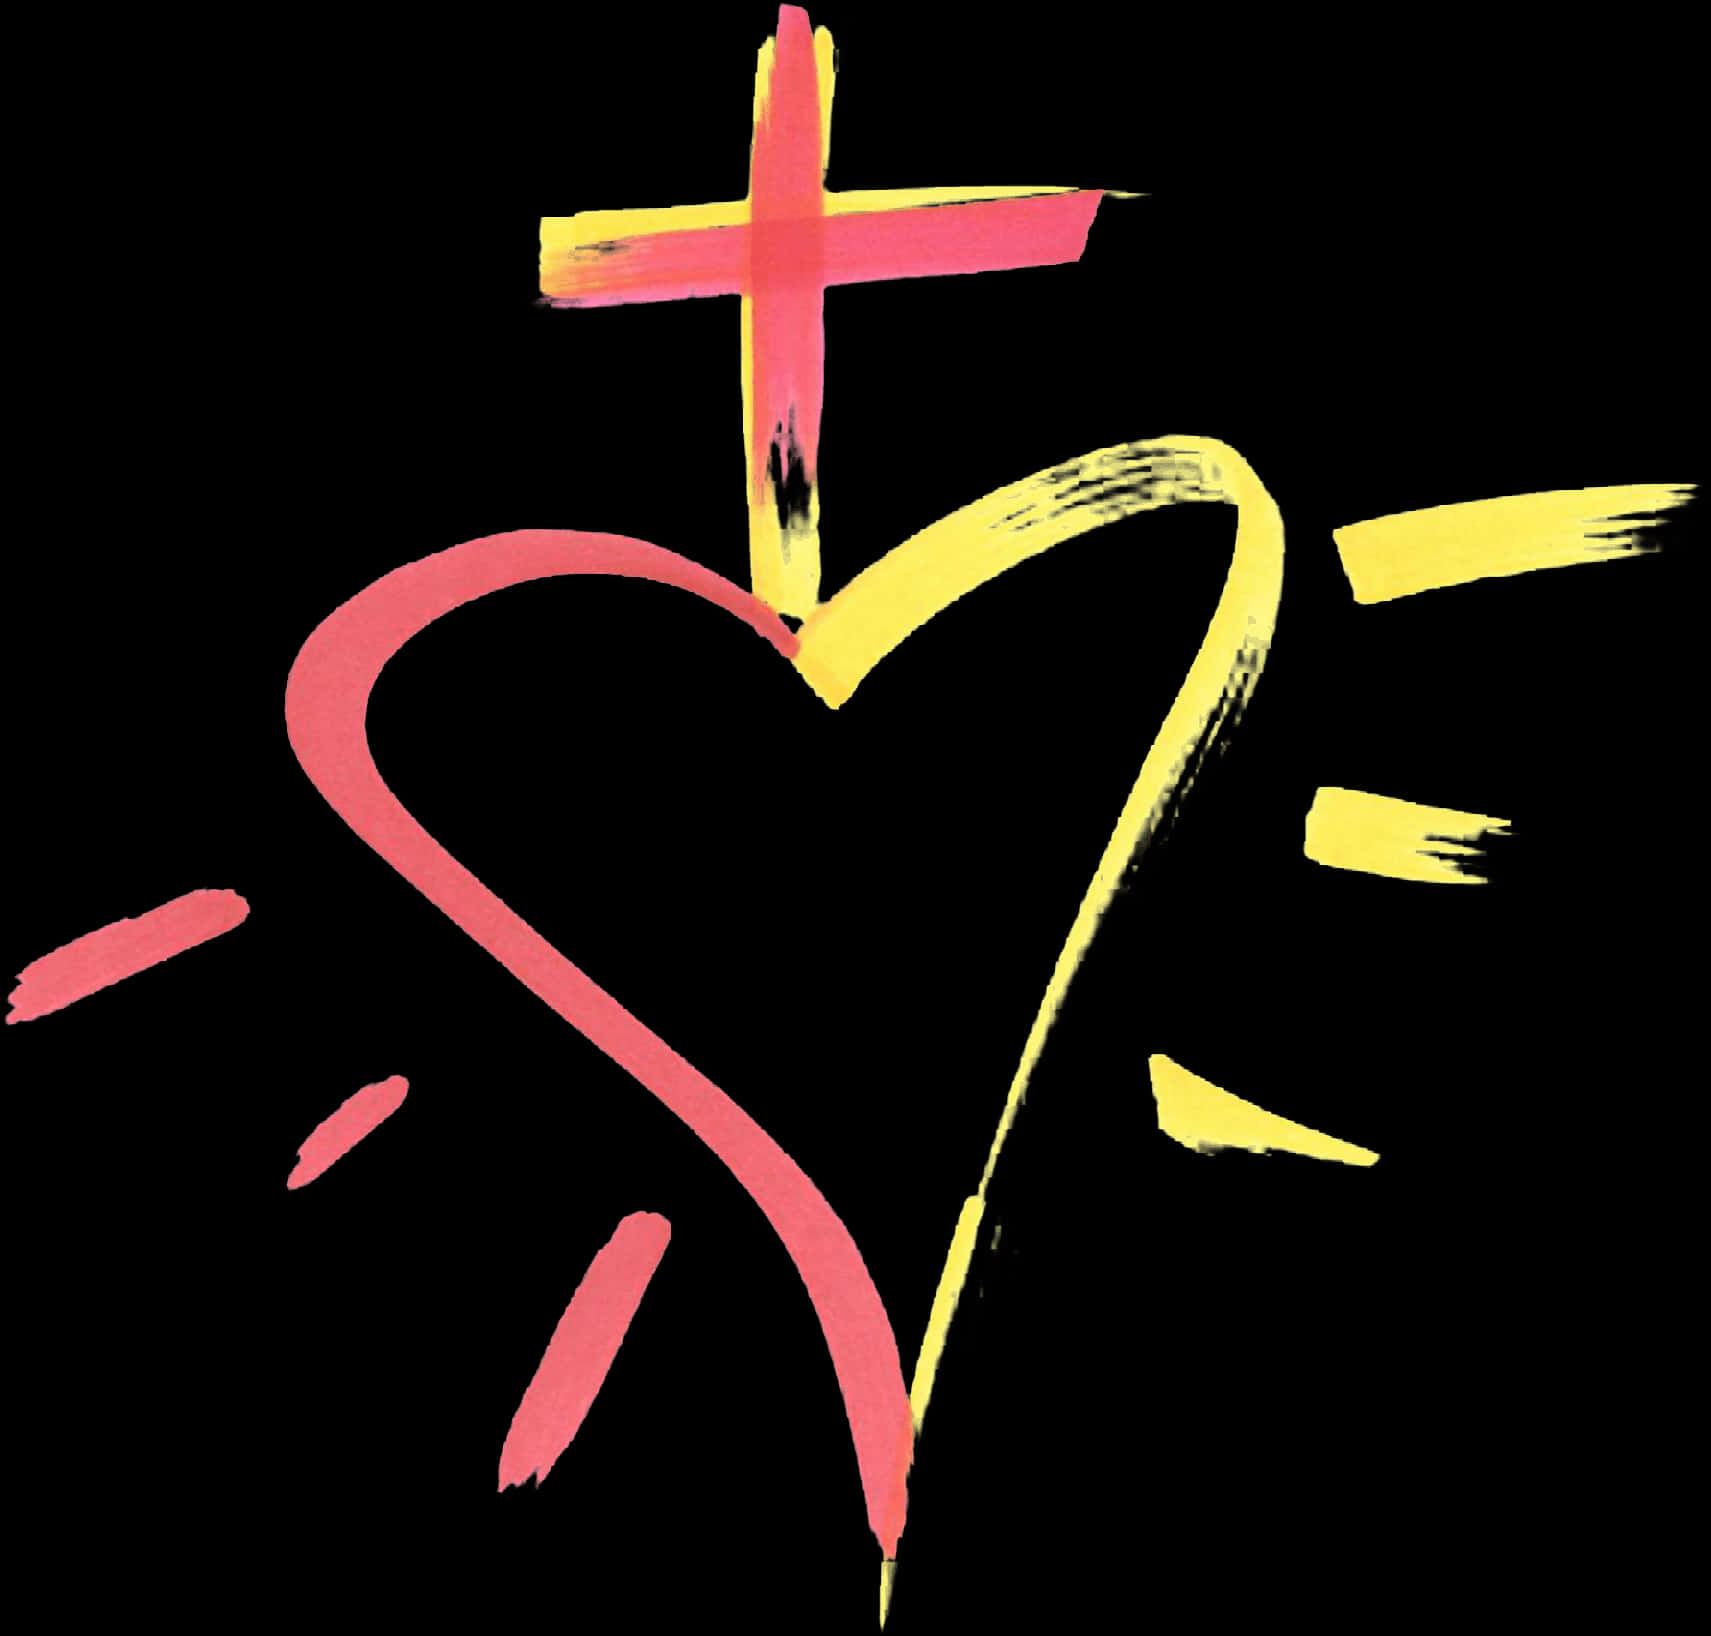 A Heart With A Cross And Light